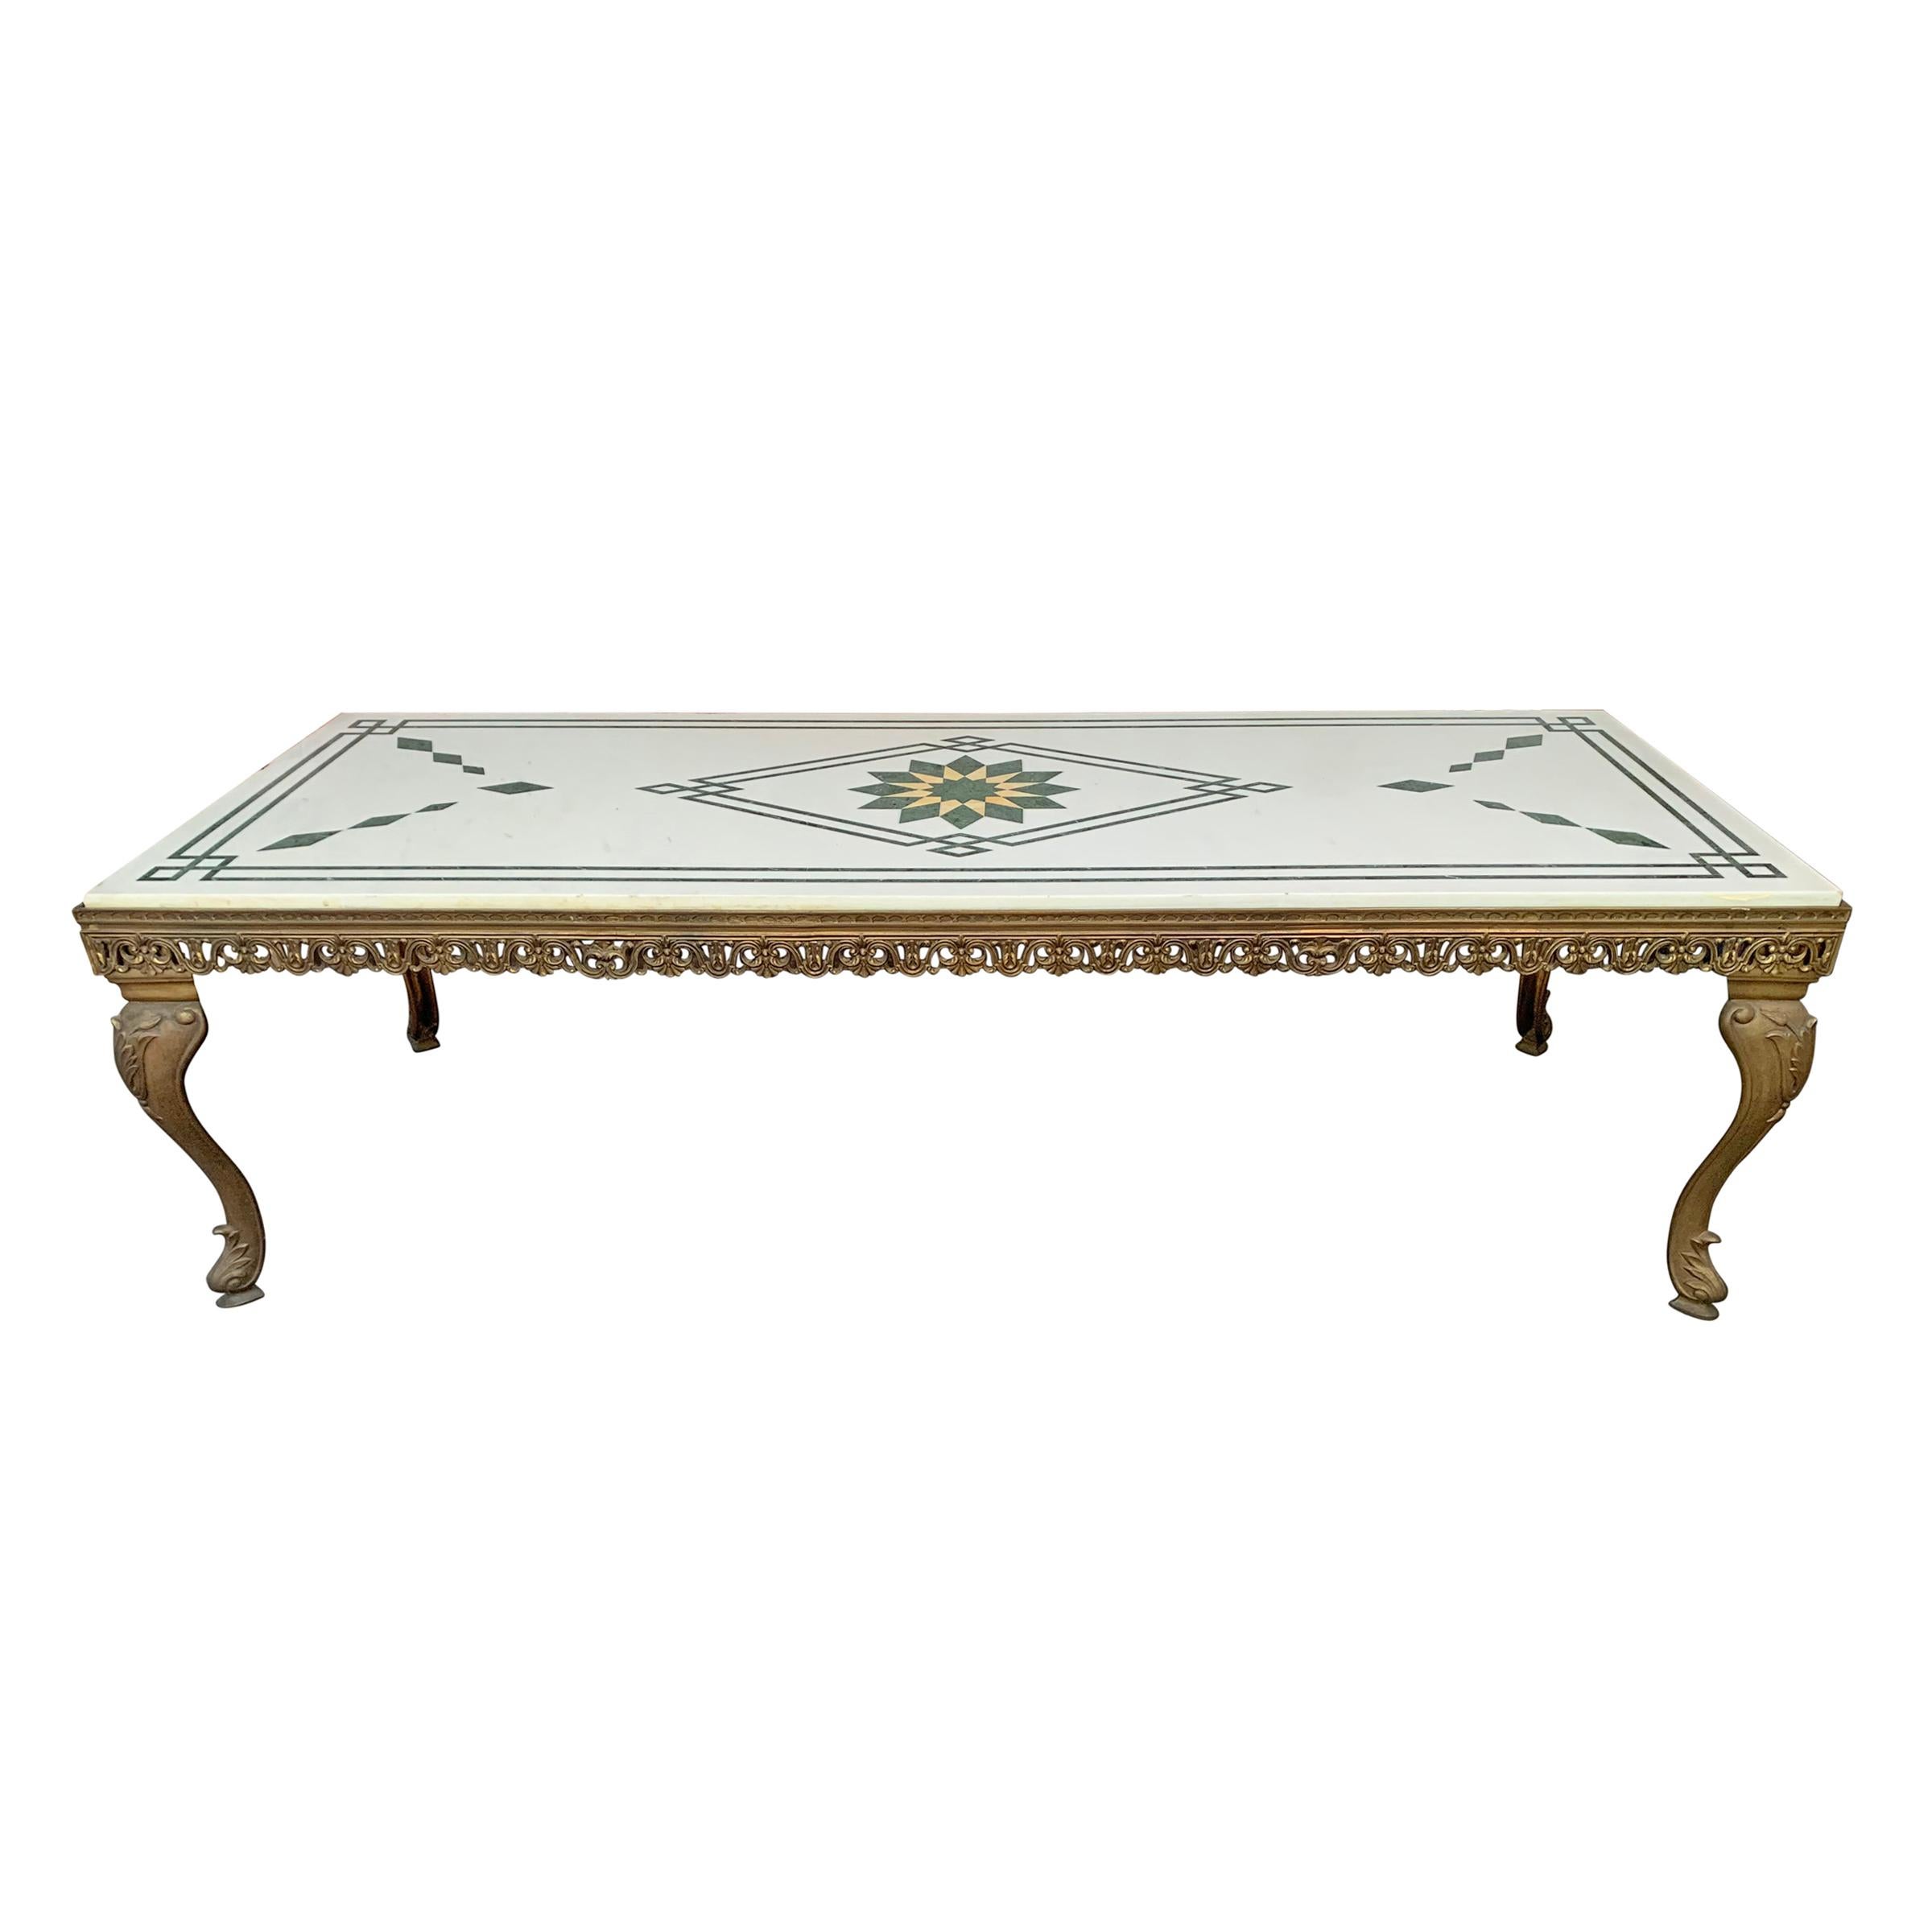 A wonderful vintage Italian low table with a white marble top with a green marble inlaid pattern of geometric design including a green and yellow starburst in the center surrounded by a stylized Greek key border. The base is cast bronze with